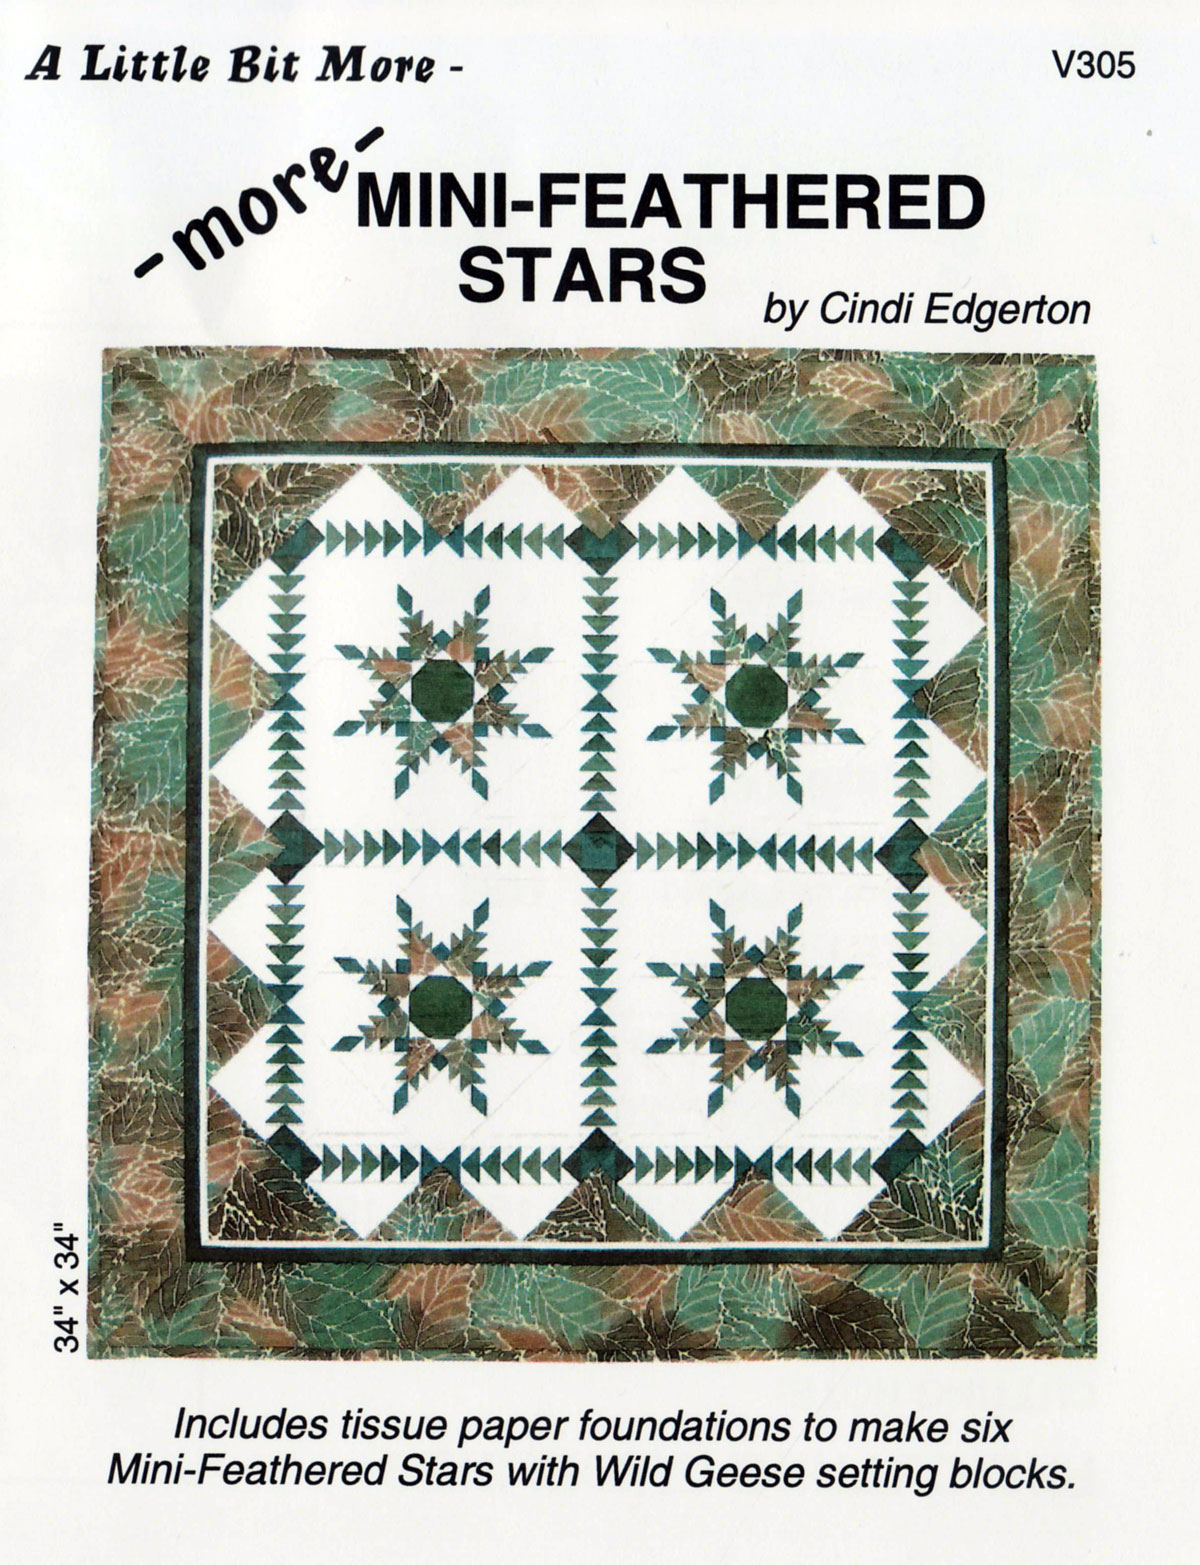 A-Little-Bit-More-More-Feathered-Stars-quilt-sewing-pattern-Cindi-Edgerton-front